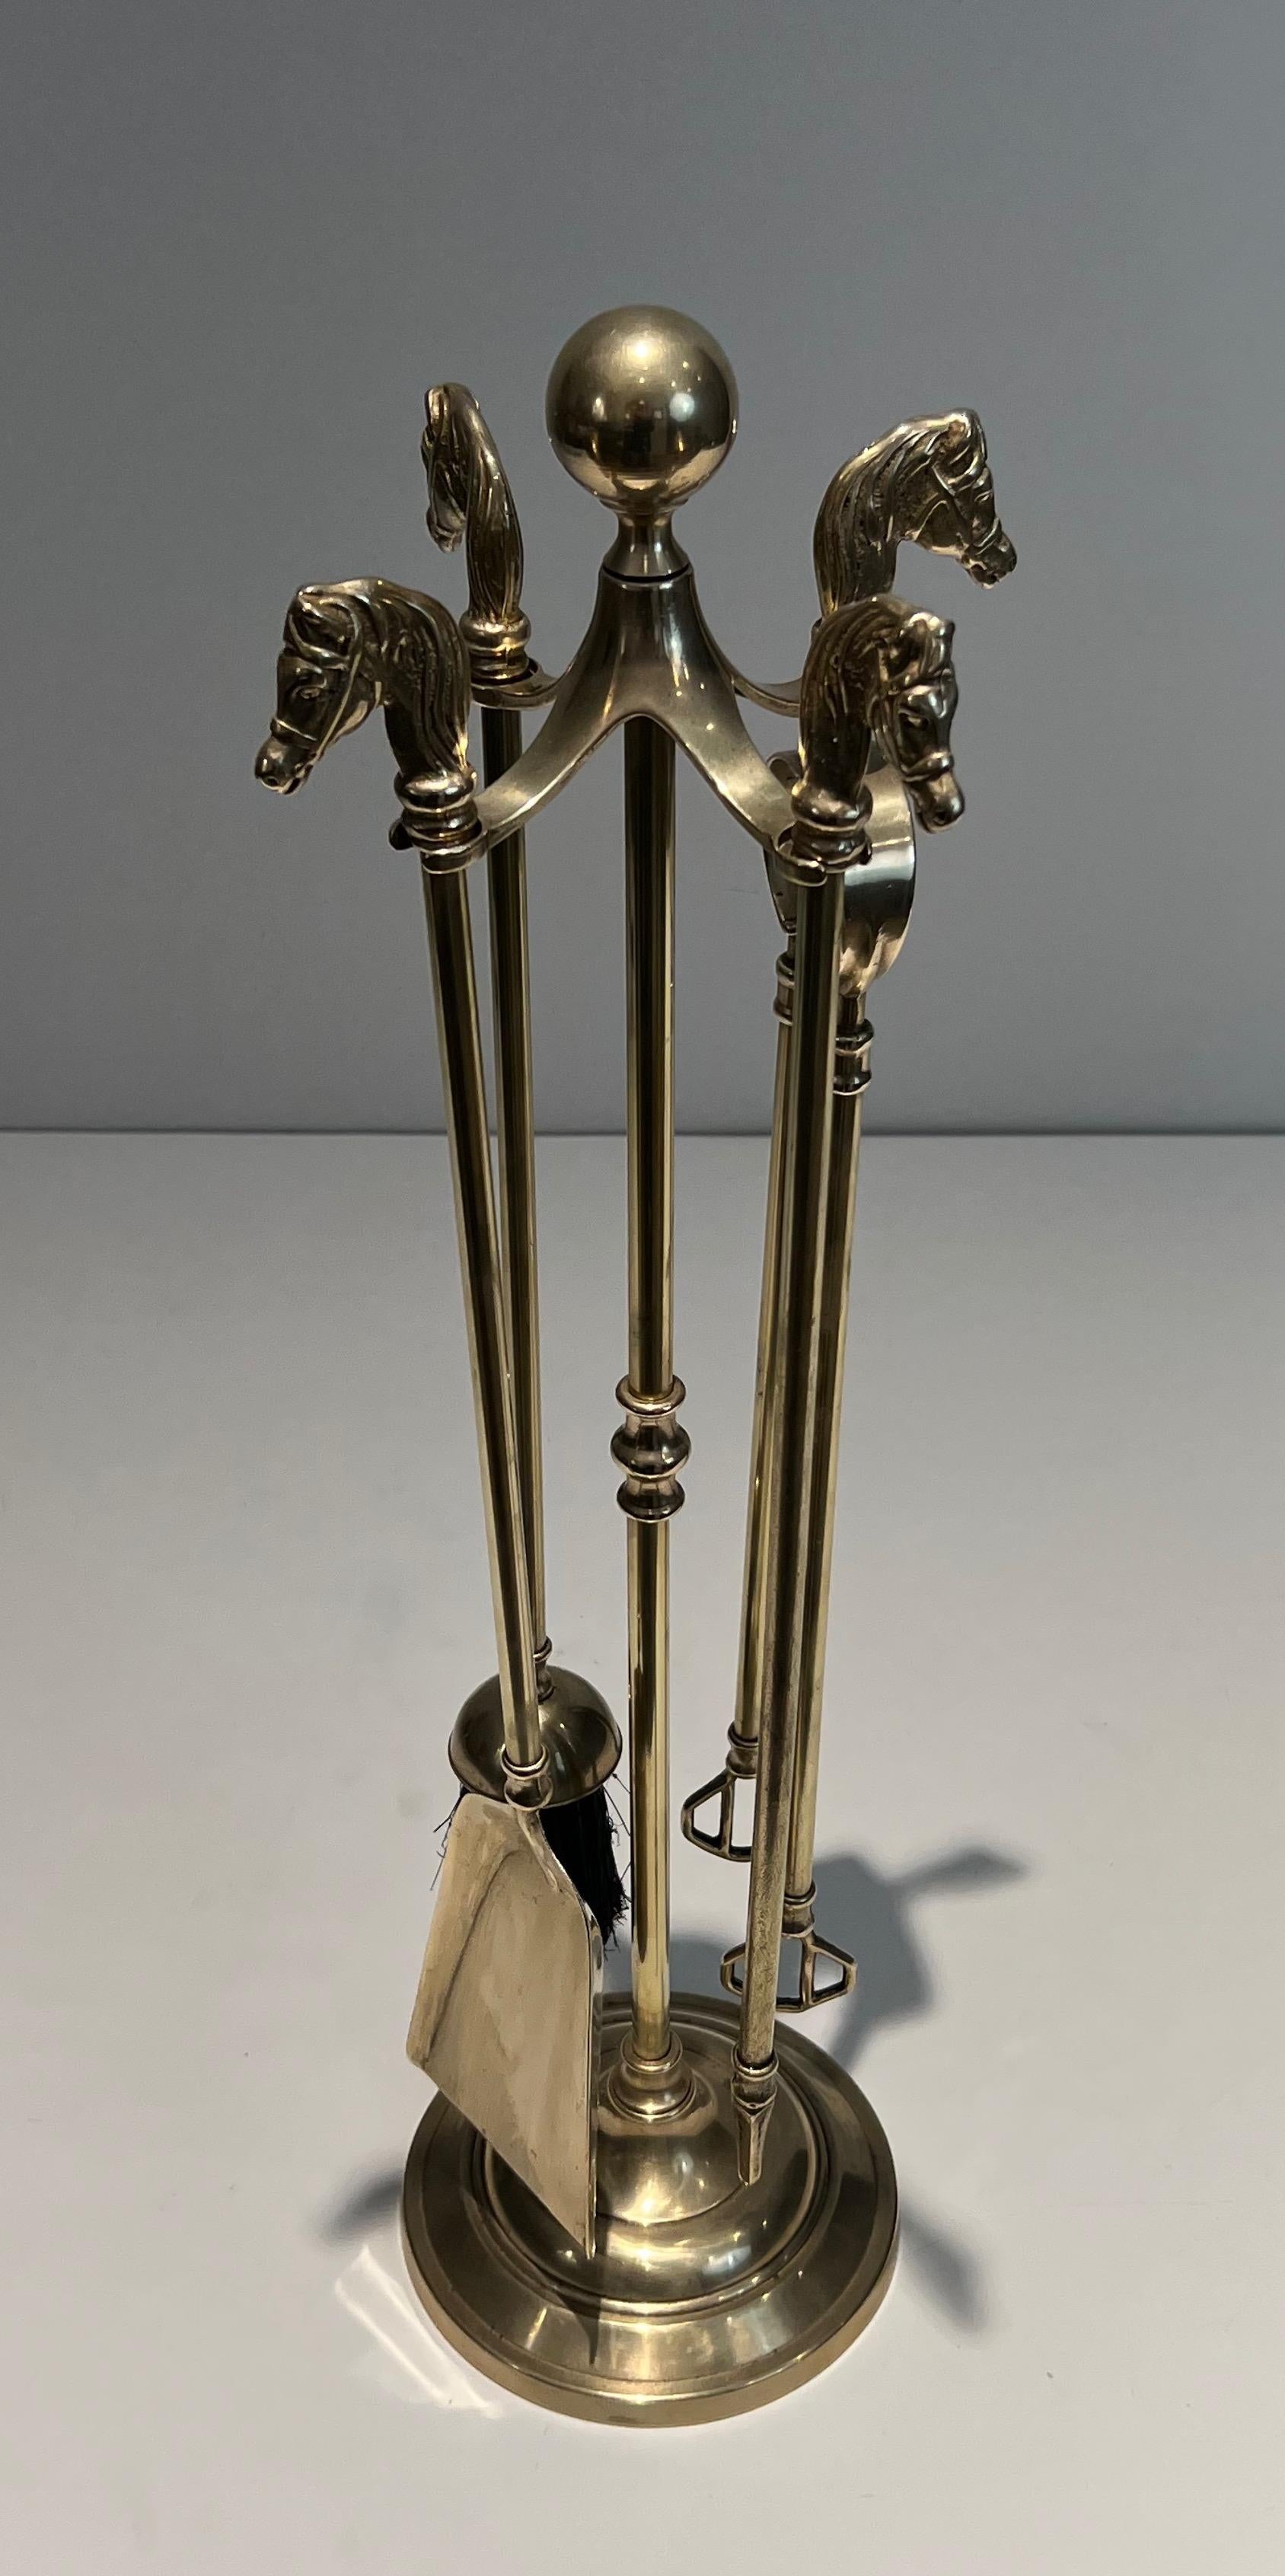 This neoclassical style horseheads fireplace tools on stand is made of brass. This is a French work. Circa 1950.